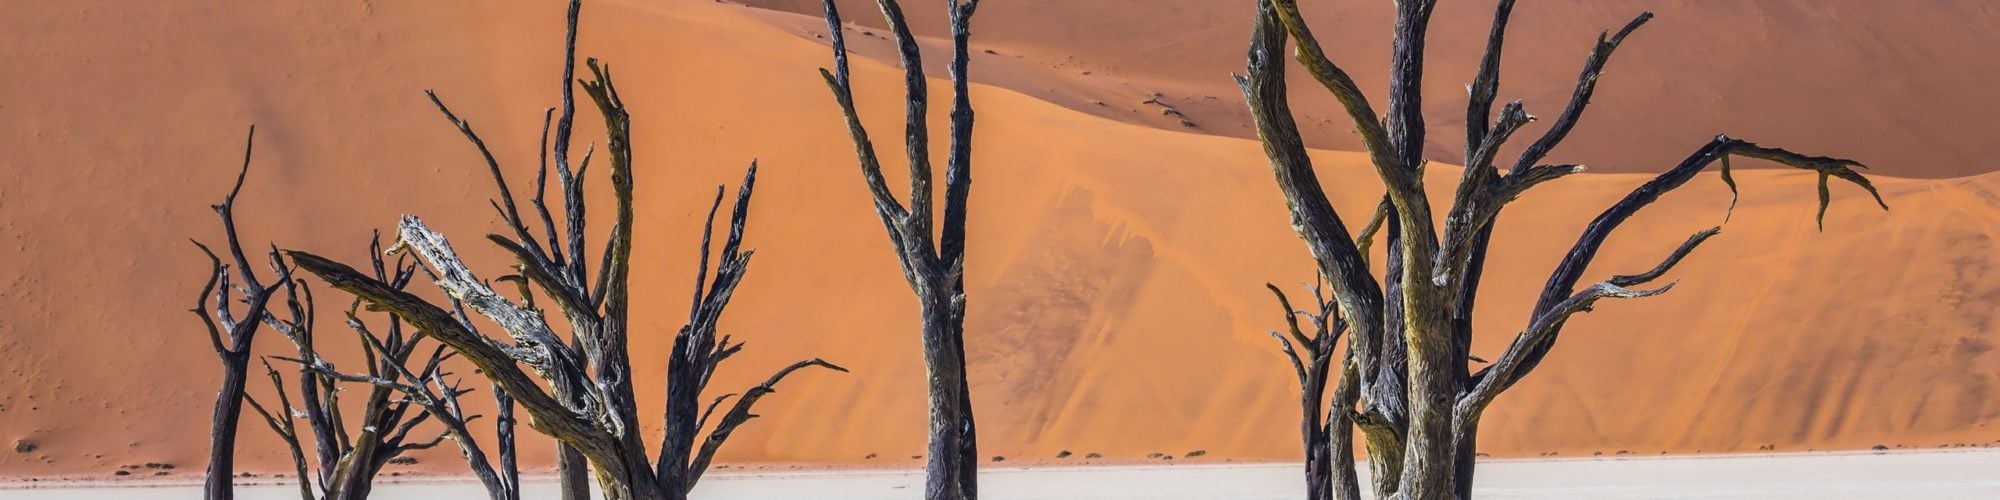 Namibia travel agents packages deals